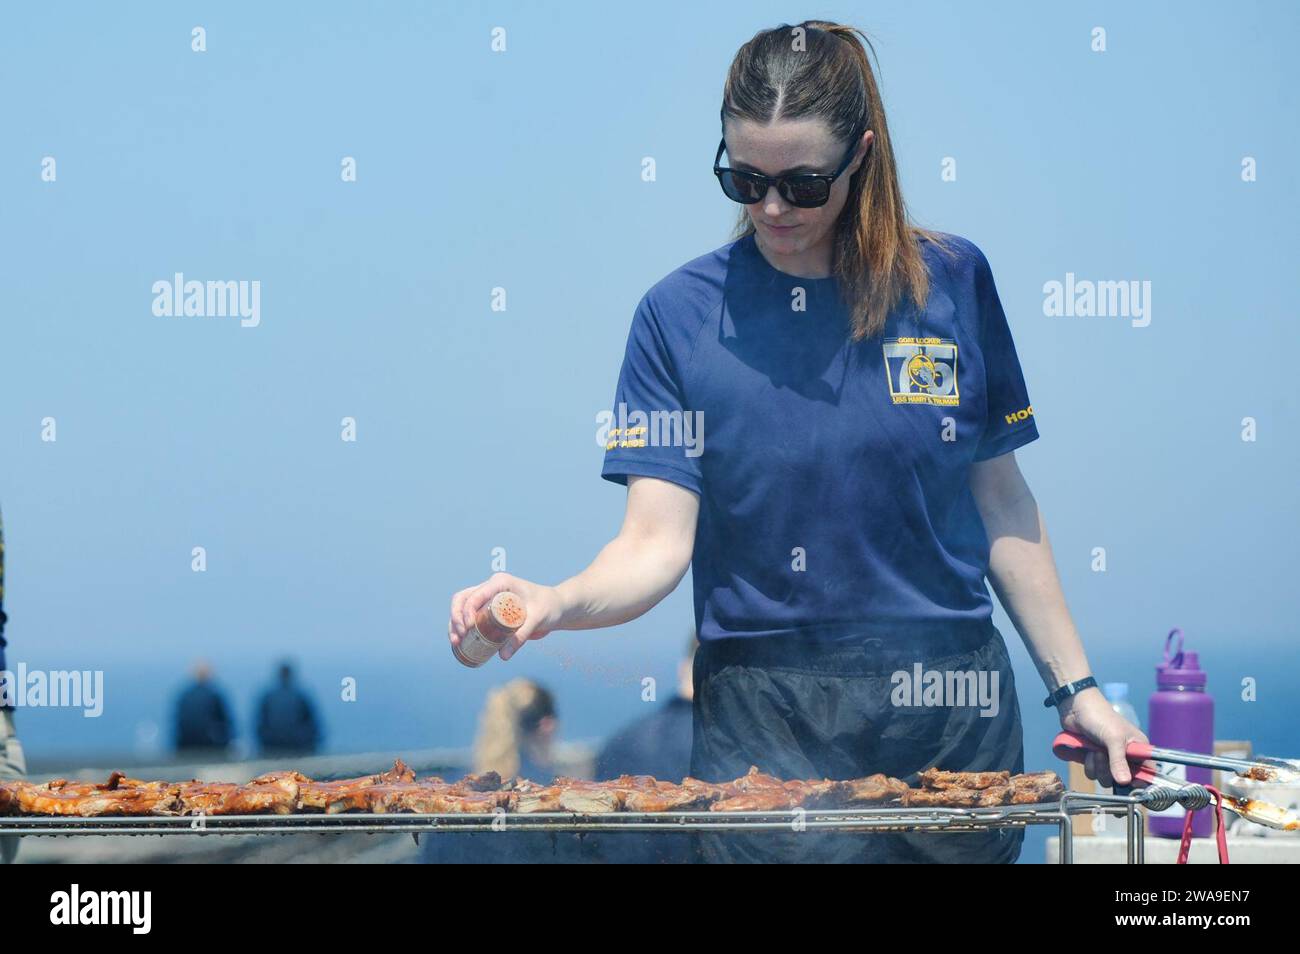 US military forces. 180708UJ486-0533 ATLANTIC OCEAN (July 8, 2018) Master-at-Arms Caitlin Swenson grills during a steel beach picnic aboard the Nimitz-class aircraft carrier USS Harry S. Truman (CVN 75). Harry S. Truman is currently deployed as part of an ongoing rotation of U.S. forces supporting maritime security operations in international waters around the globe. (U.S. Navy photo by Mass Communication Specialist 3rd Class Rebekah A. Watkins/Released) Stock Photo